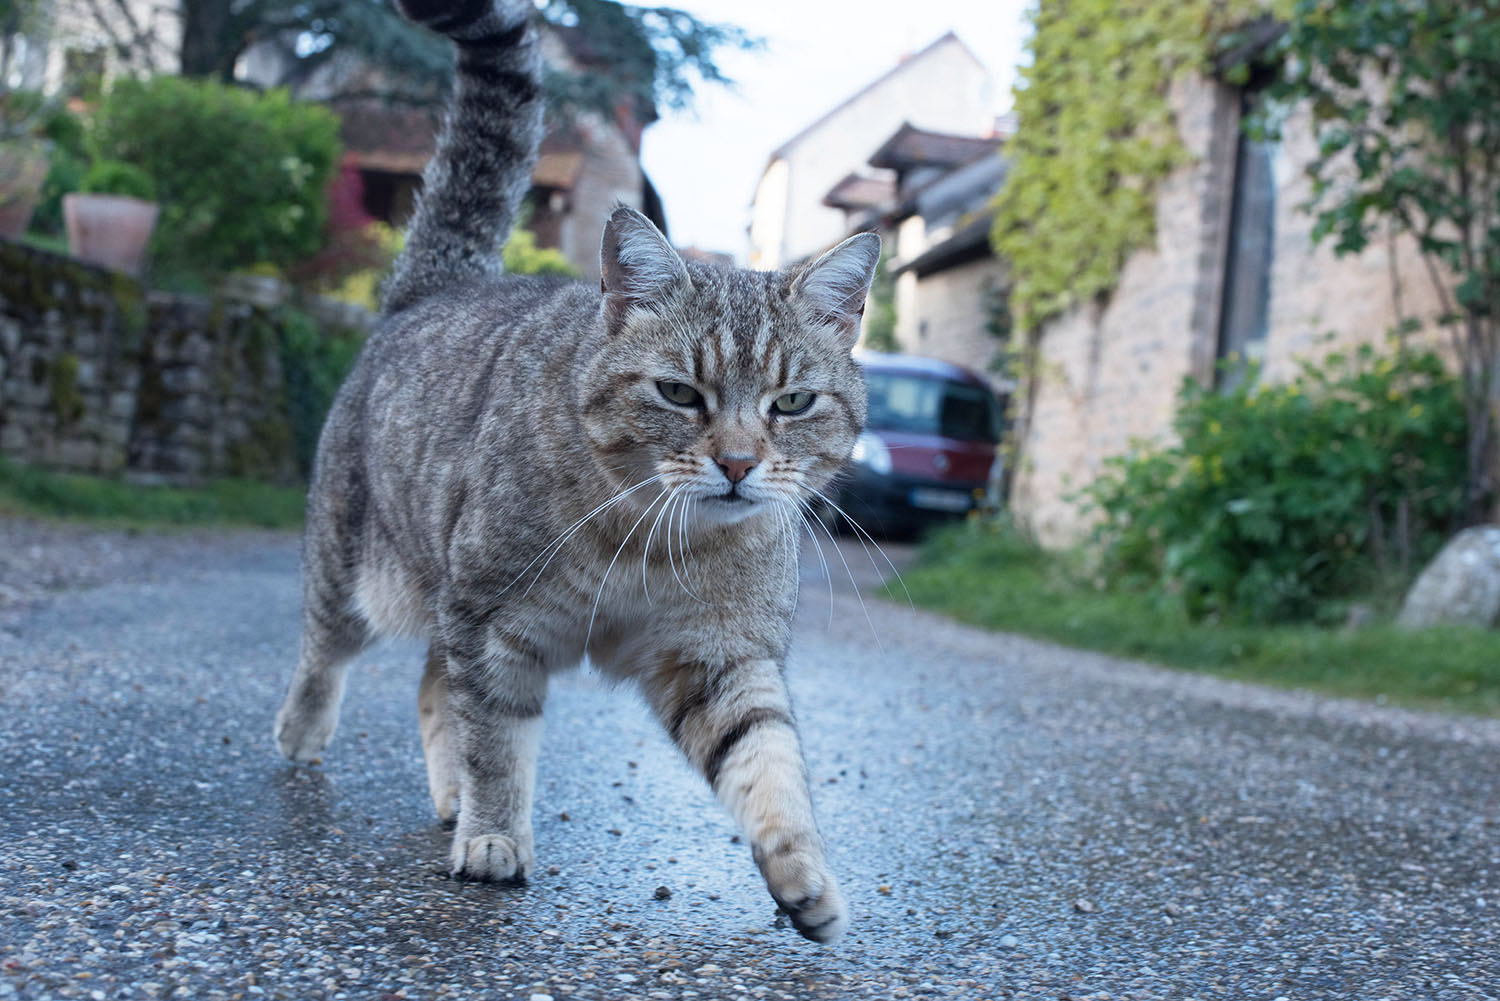 A cat walks on the streets of Chateauneuf-en-Auxois in Burgundy, as captured by travel blogger Cee Fardoe of Coco & Vera